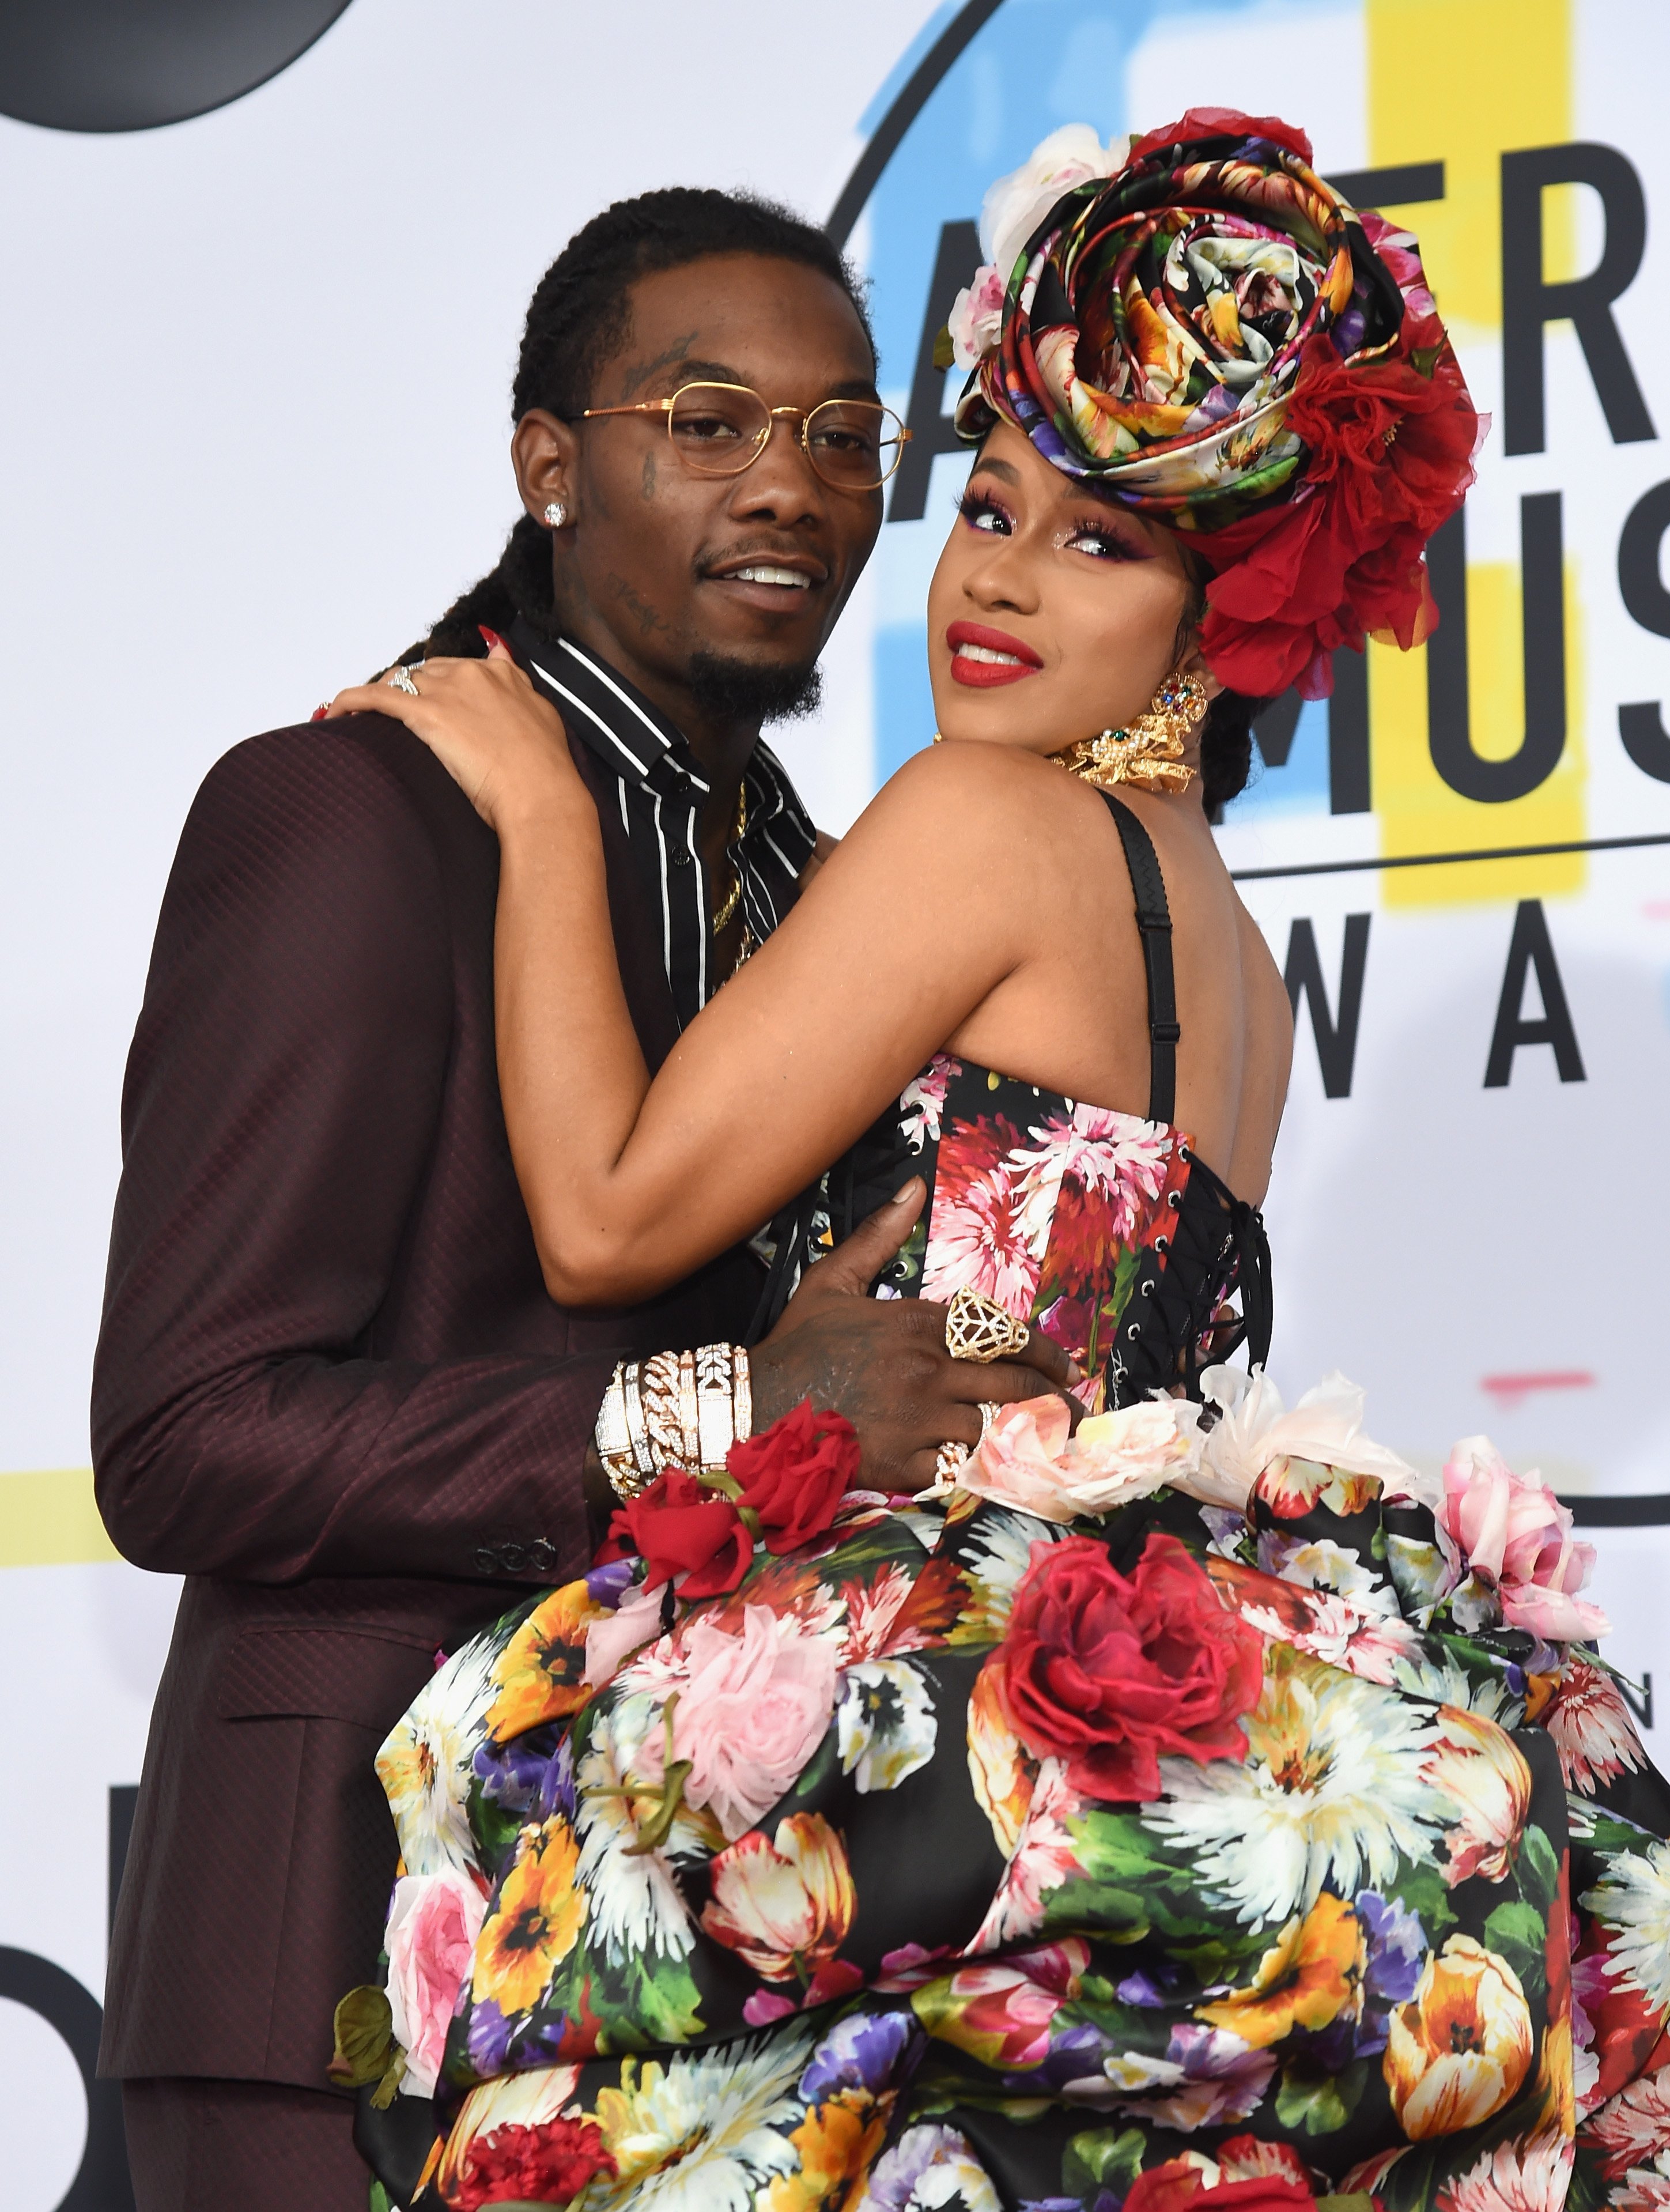  Offset and Cardi B at the 2018 American Music Awards on October 9, 2018 at Microsoft Theater | Photo: Getty Images